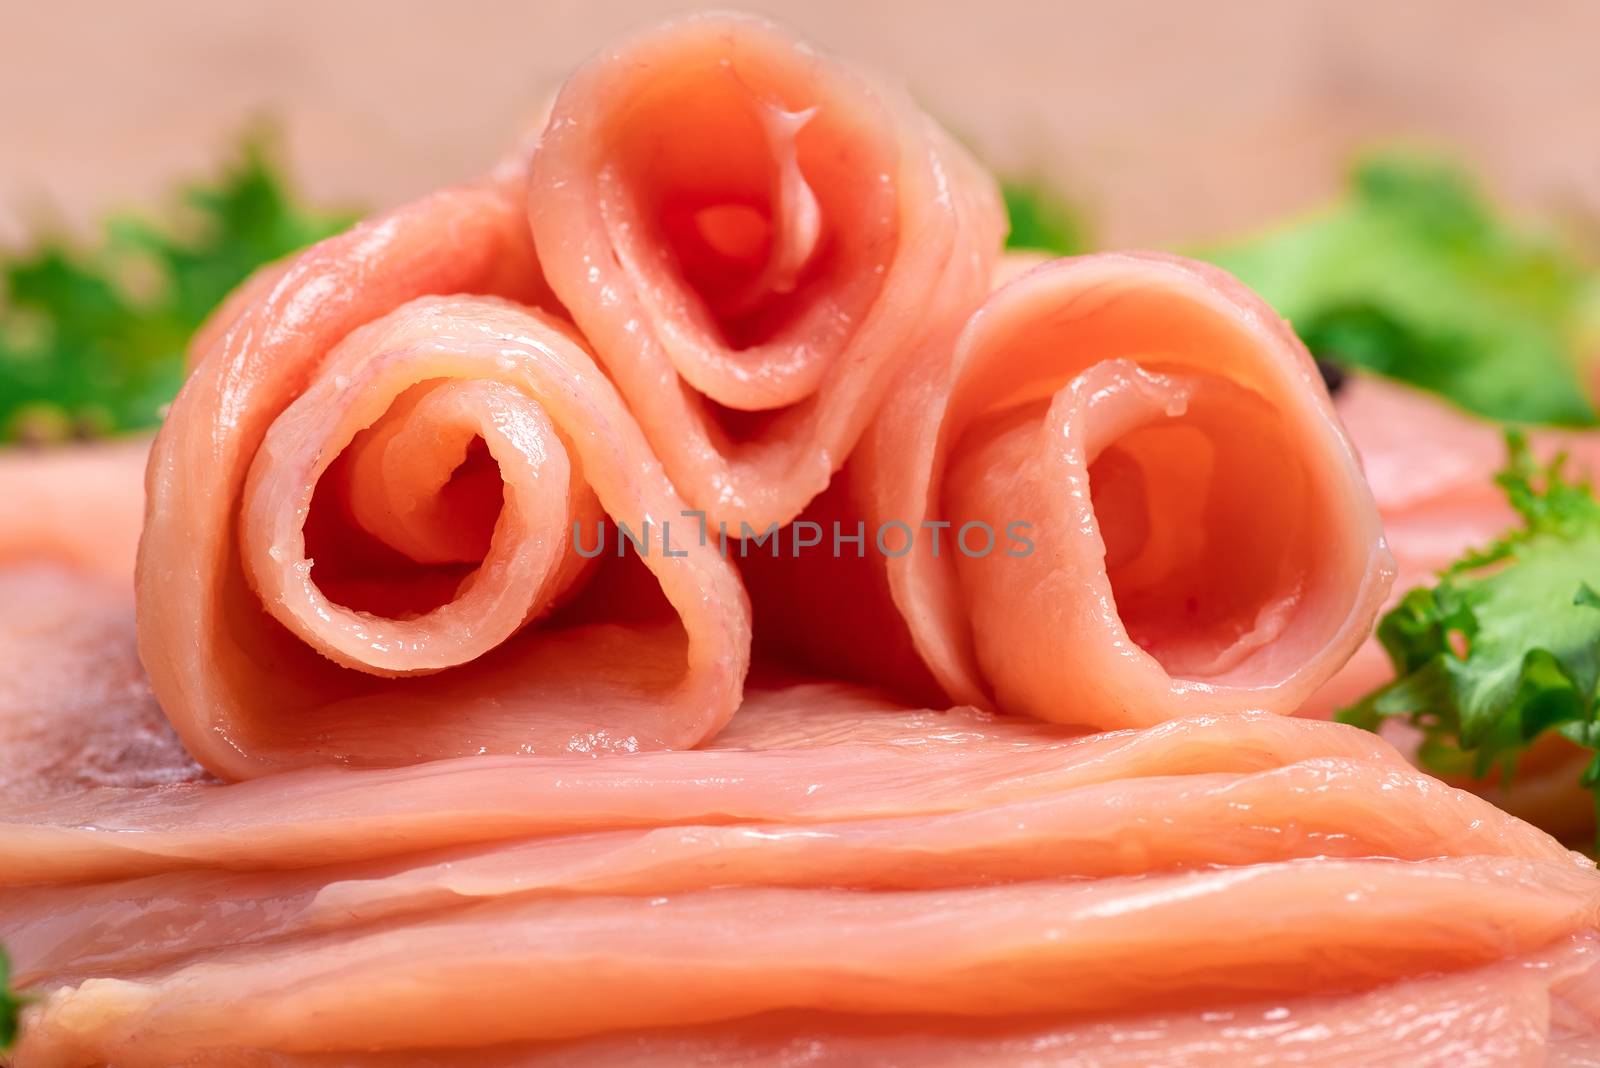 Raw chicken slices on a wooden table with raw vegetables and spices. Satilisimo. Delicious dietary meat. Close-up view of raw, fresh, choped and sliced chicken meat. Cooking,raw sliced chicken breast. by nkooume